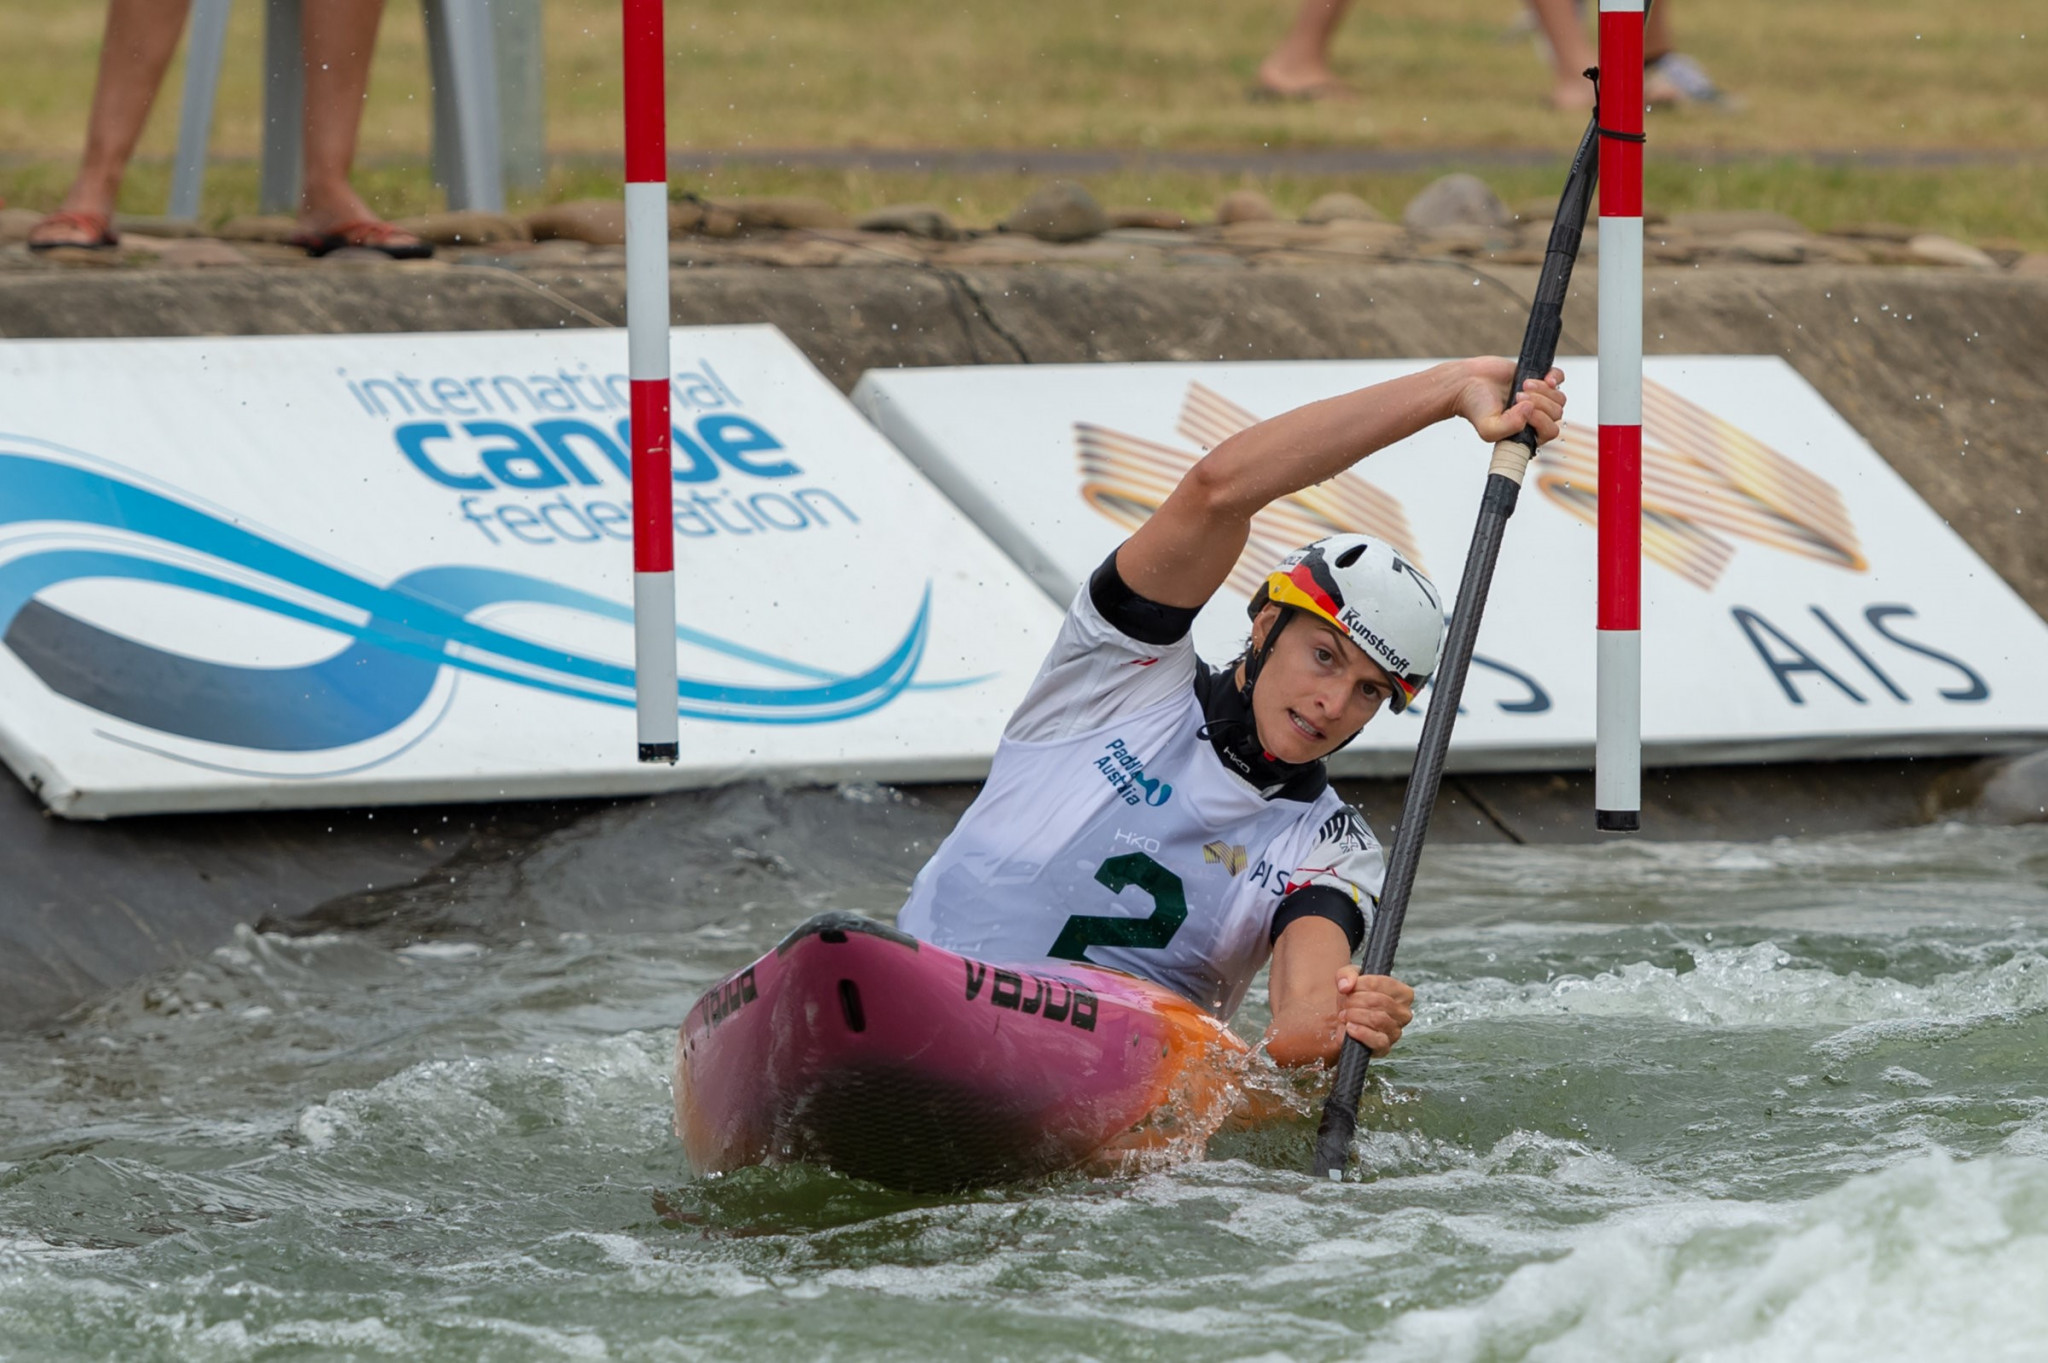 Funk and Anton earn victories at Oceania Canoe Slalom Championships